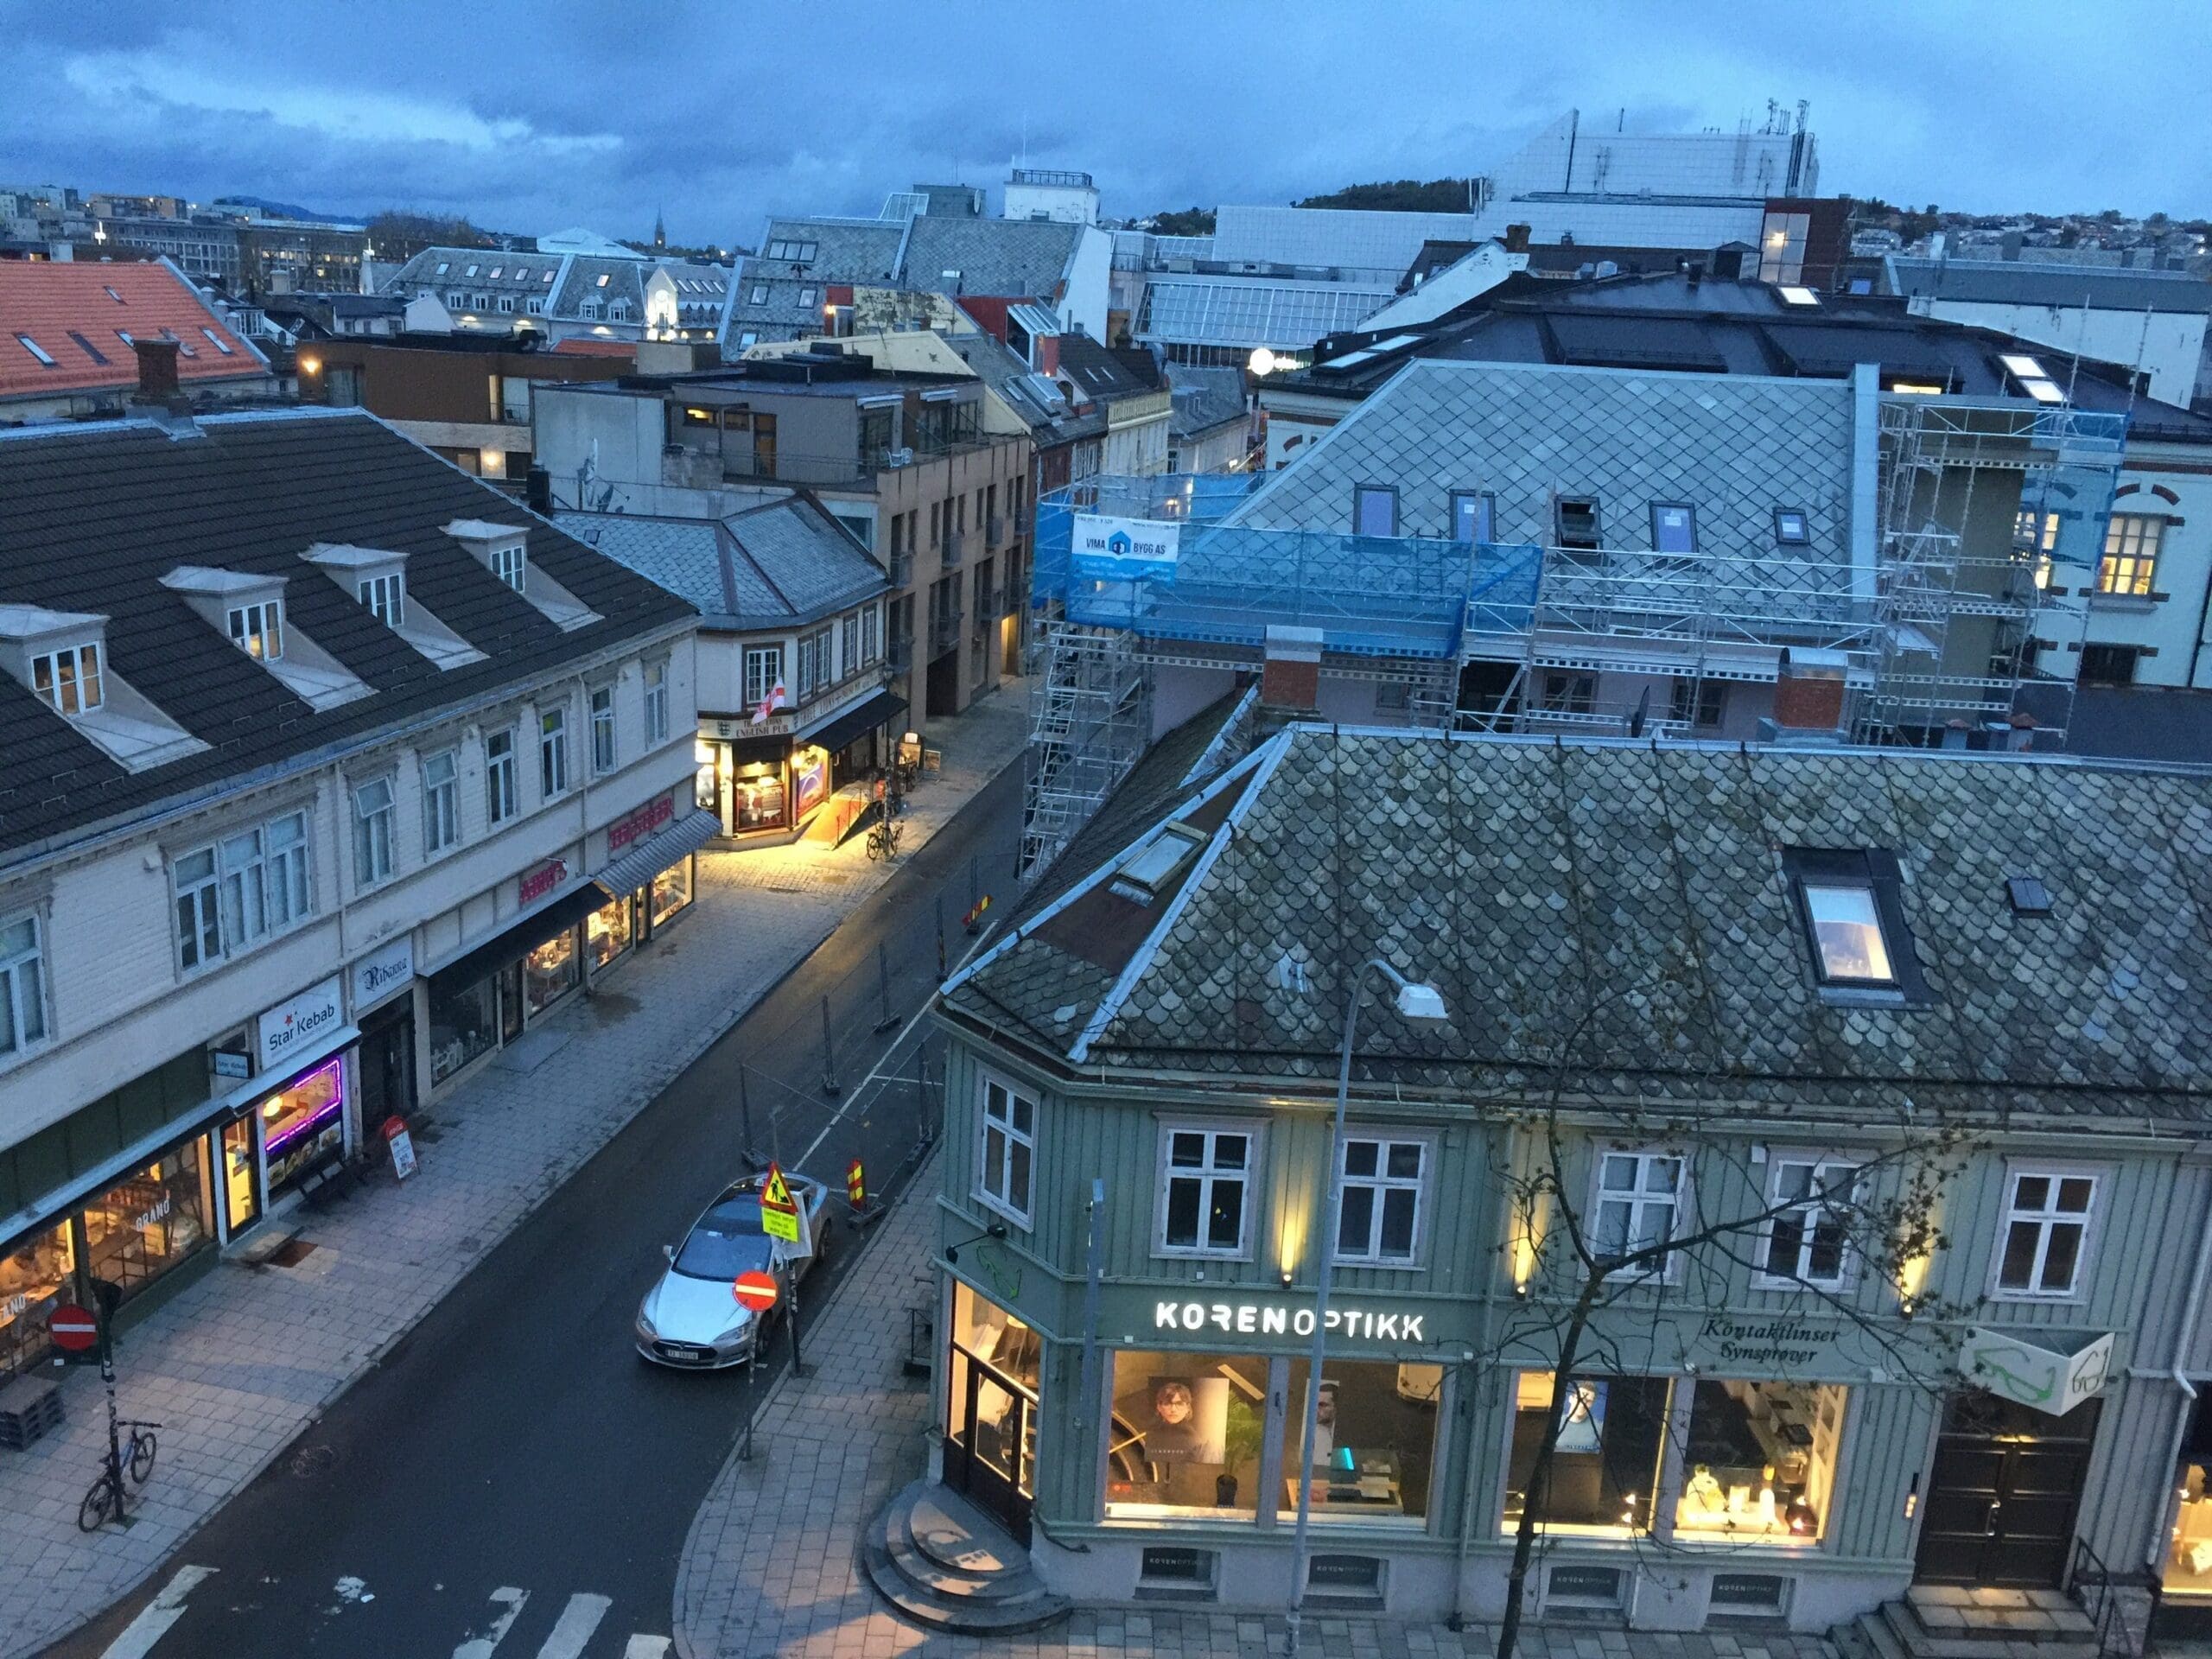 View from our hotel room - 3 days in Trondheim Norway